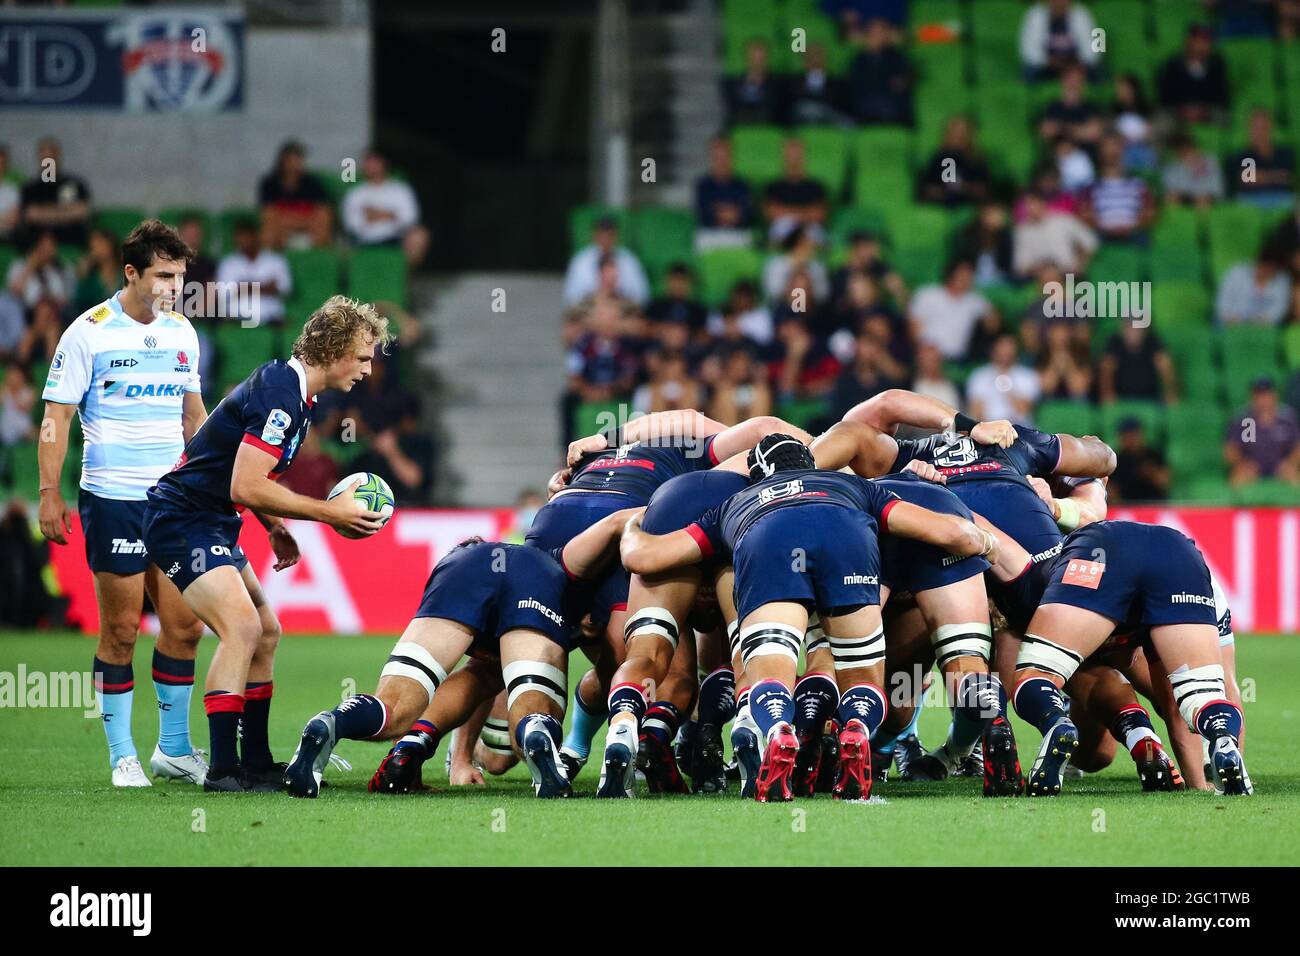 MELBOURNE, AUSTRALIA - MARCH 19: Joe Powell of the Melbourne Rebels feeds the ball into the scrum during the round 5 Super Rugby match between the Melbourne Rebels and NSW Waratahs at AAMI Park on March 19, 2021 in Melbourne, Australia.  Credit: Dave Hewison/Speed Media/Alamy Live News Stock Photo